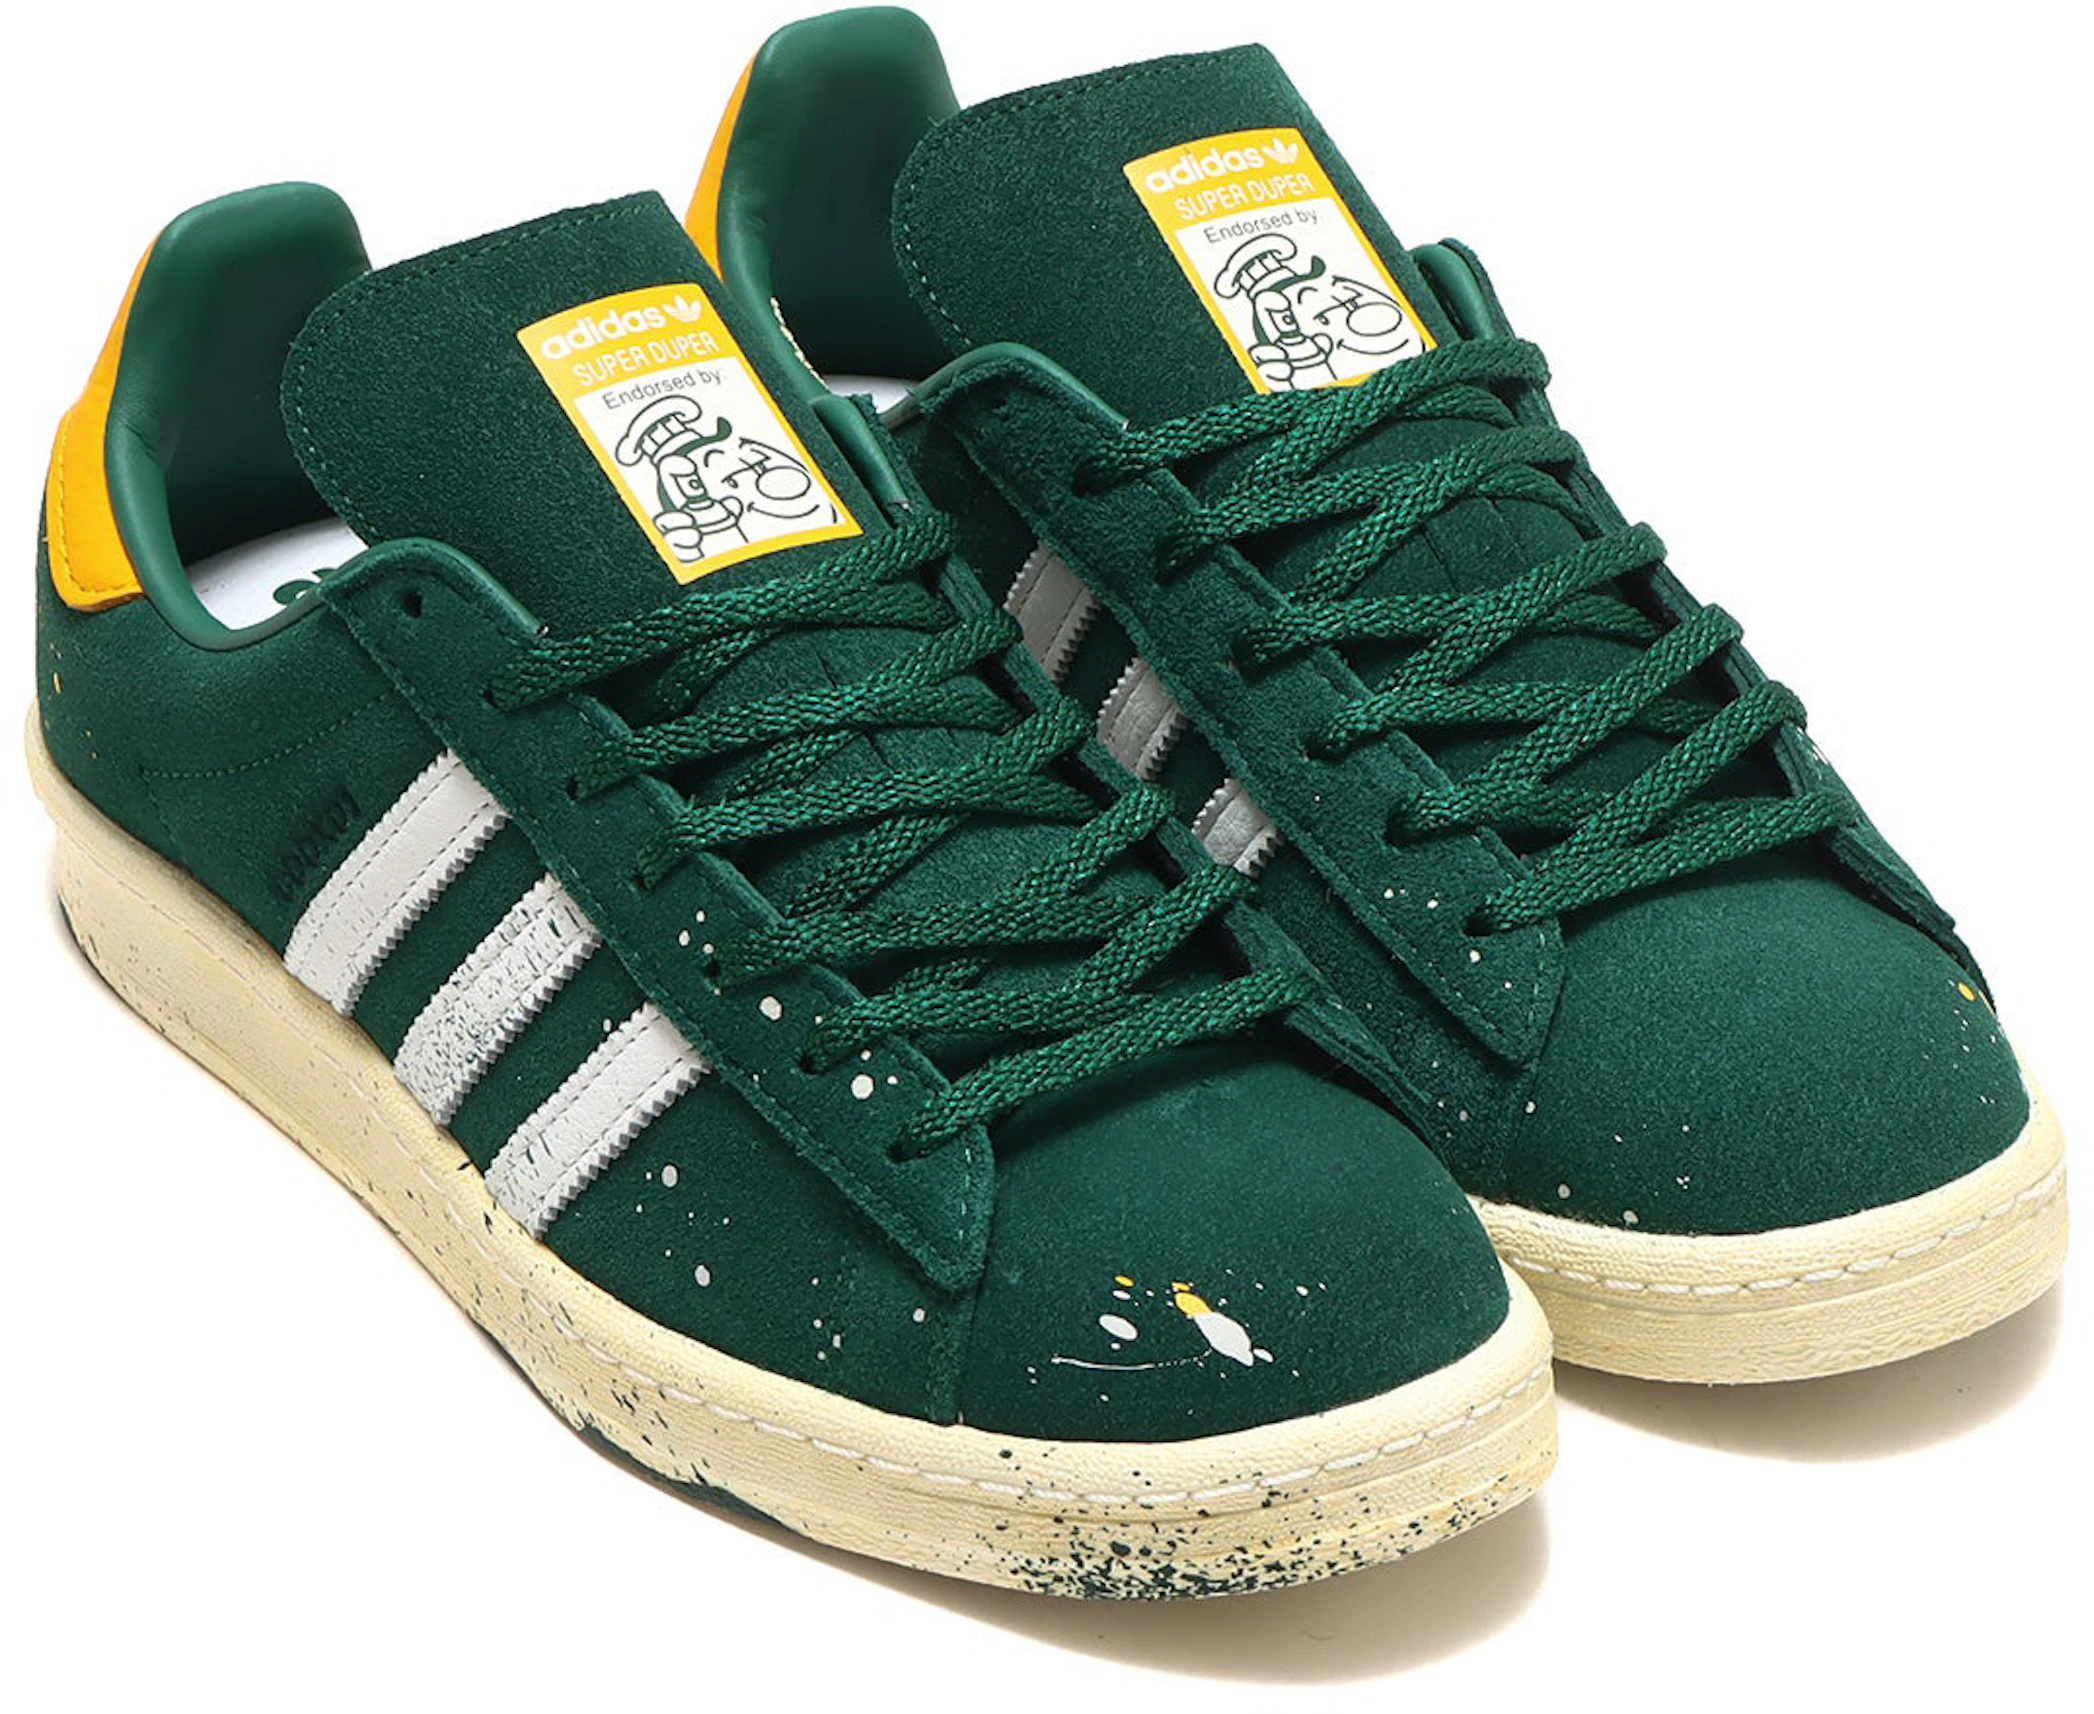 adidas Campus 80s Cook Green GY7005 - US